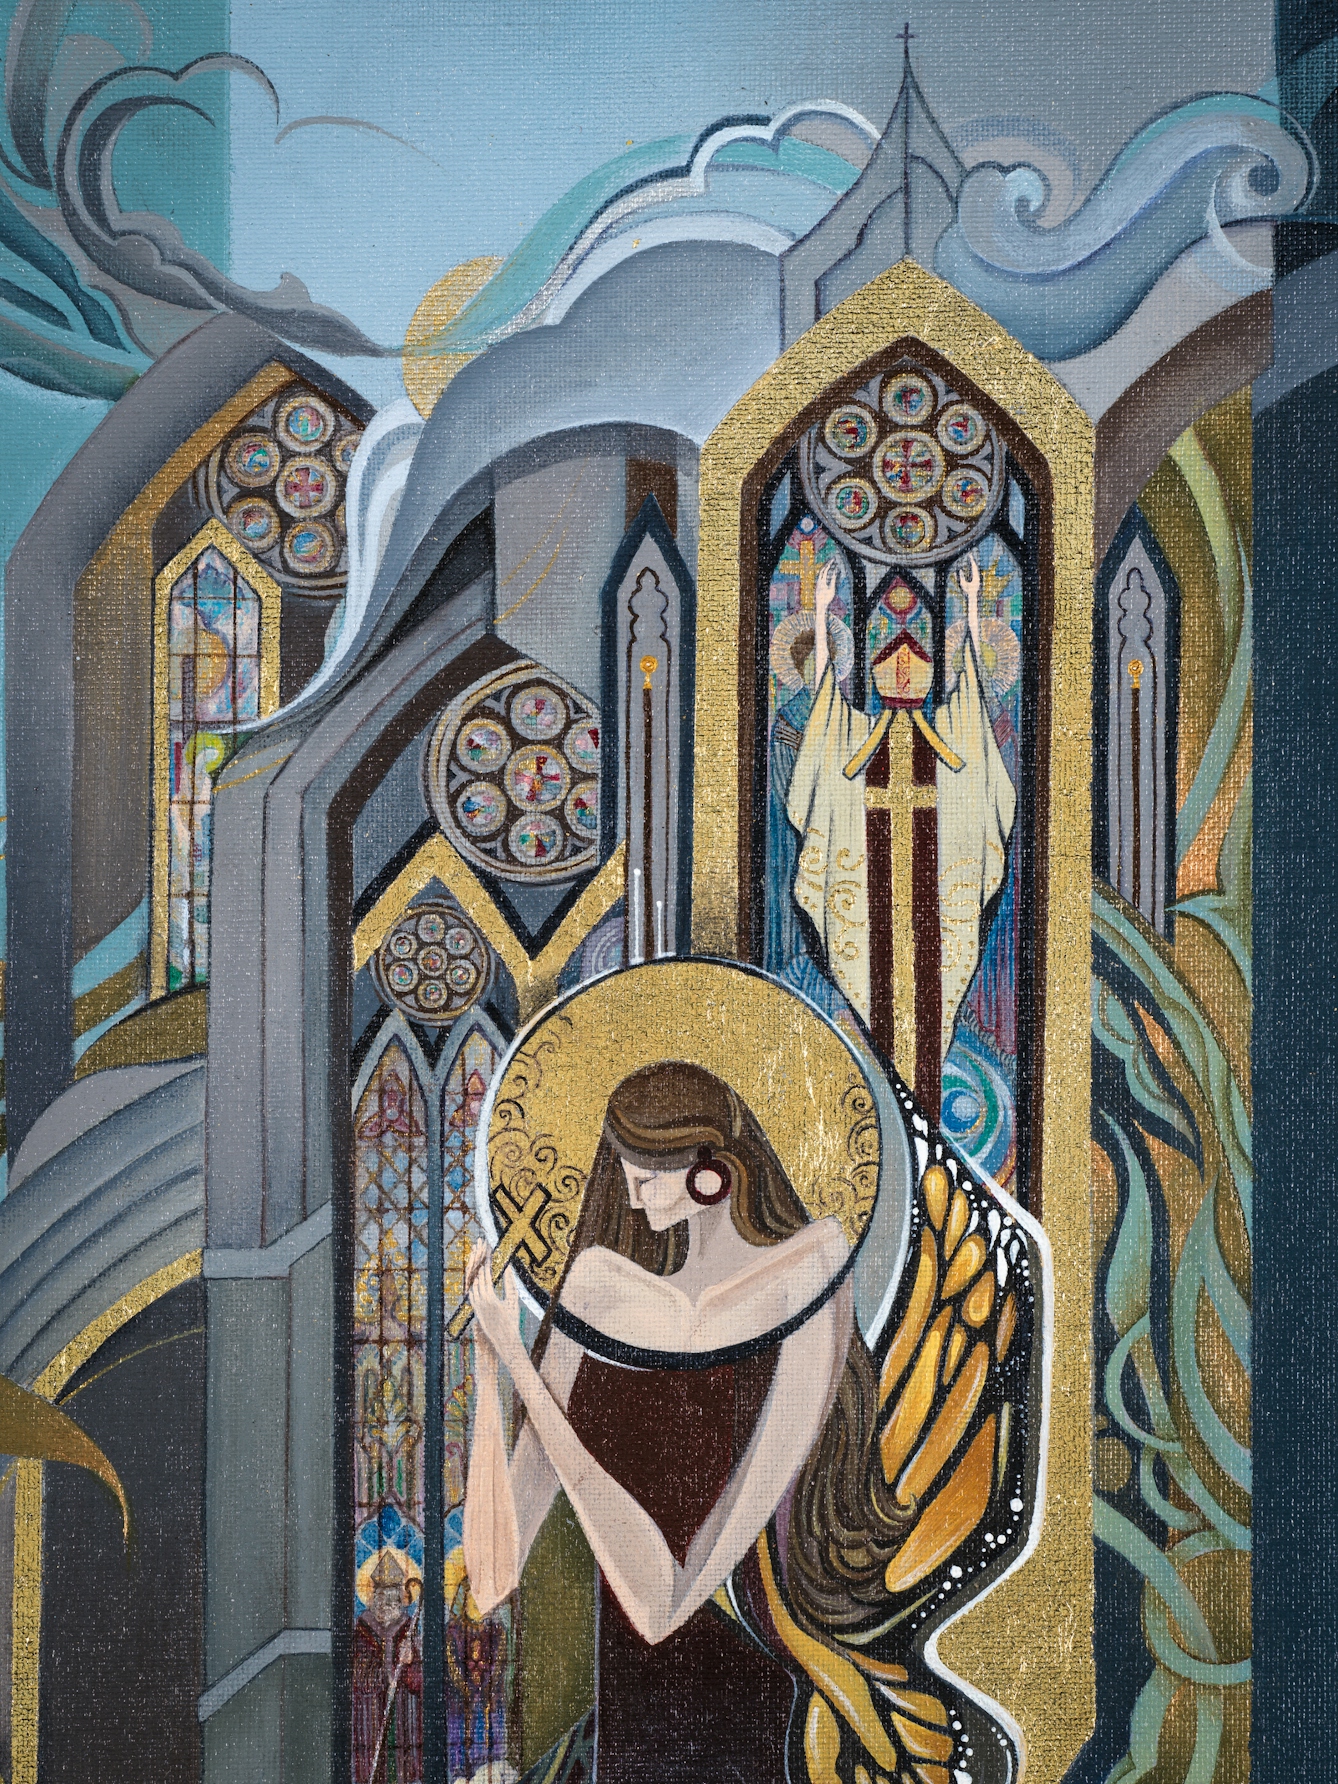 Artwork in acrylic paint on canvas showing a stylistic portrayal of a woman holding a crucifix, set within a scene of christian stained glass, arched windows and cathedral-like structures. Behind her head is a large golden halo-like form and butterfly wings seem to protrude on her left hand side. In the distance blue cloud filled Skys frame the arched structures.